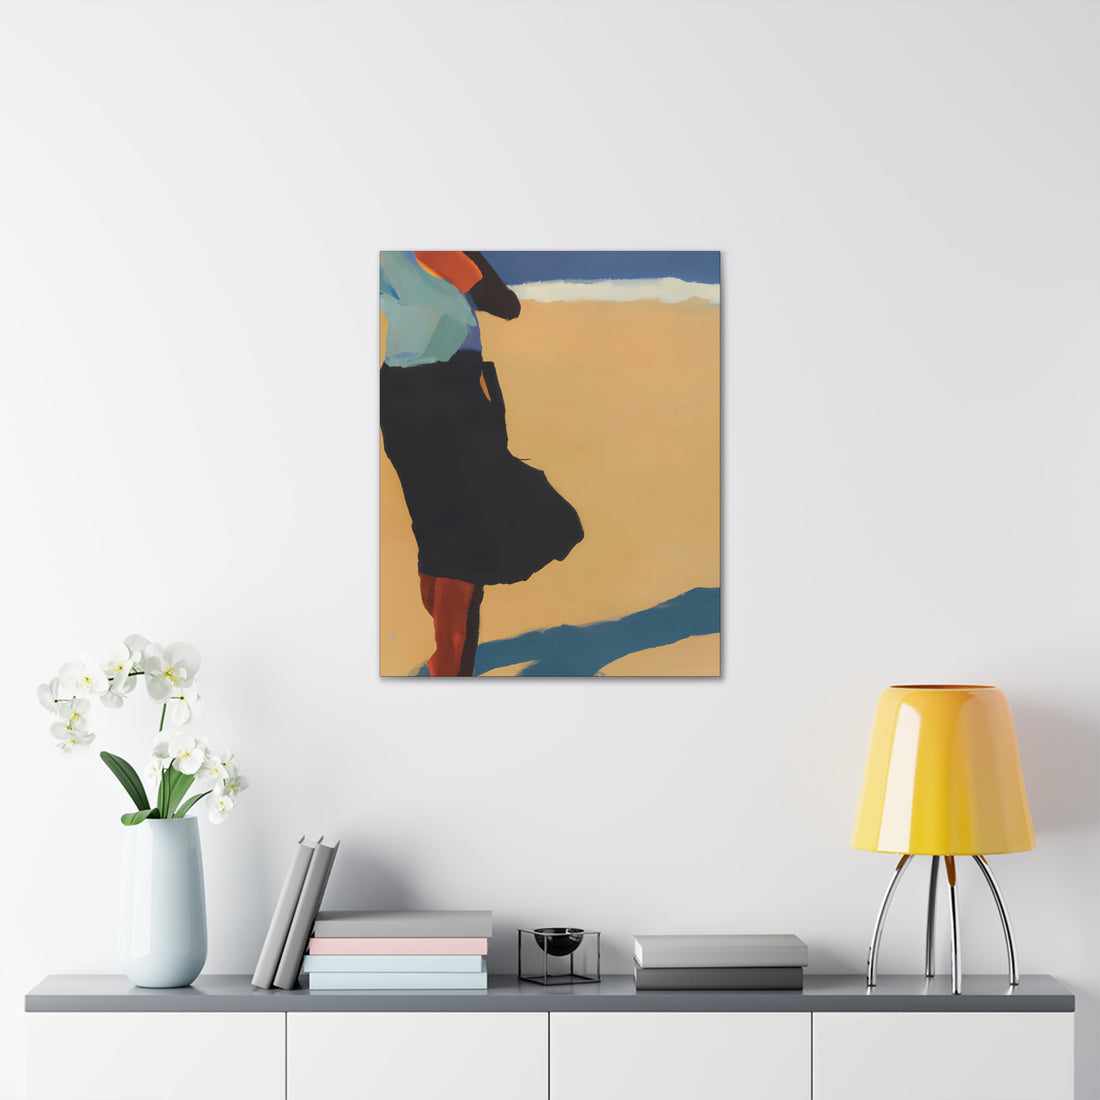 Optimistic, Fluid Series | Wrapped CANVAS | Black art for the home, African American contemporary art, Black artist prints, modern, minimal